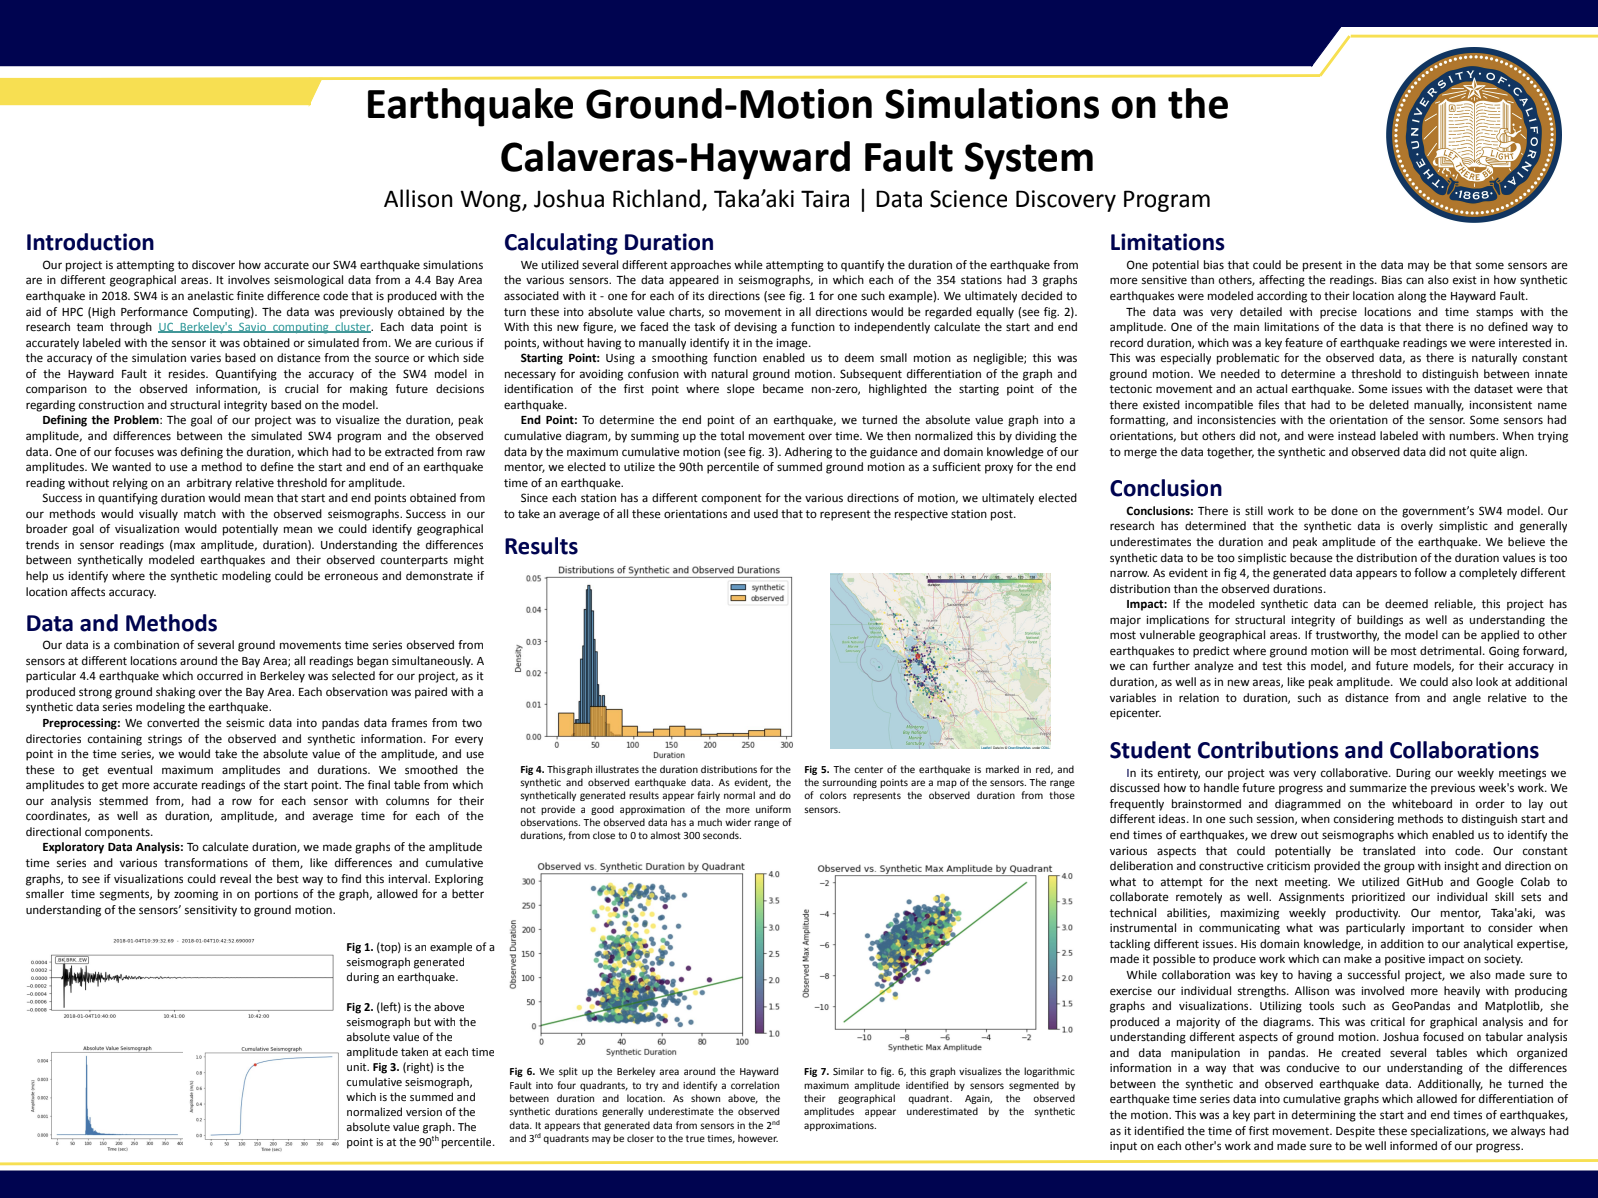 Earthquake Ground-Motion Simulations on the Calaveras-Hayward Fault System - Fall 2022 Discovery Project